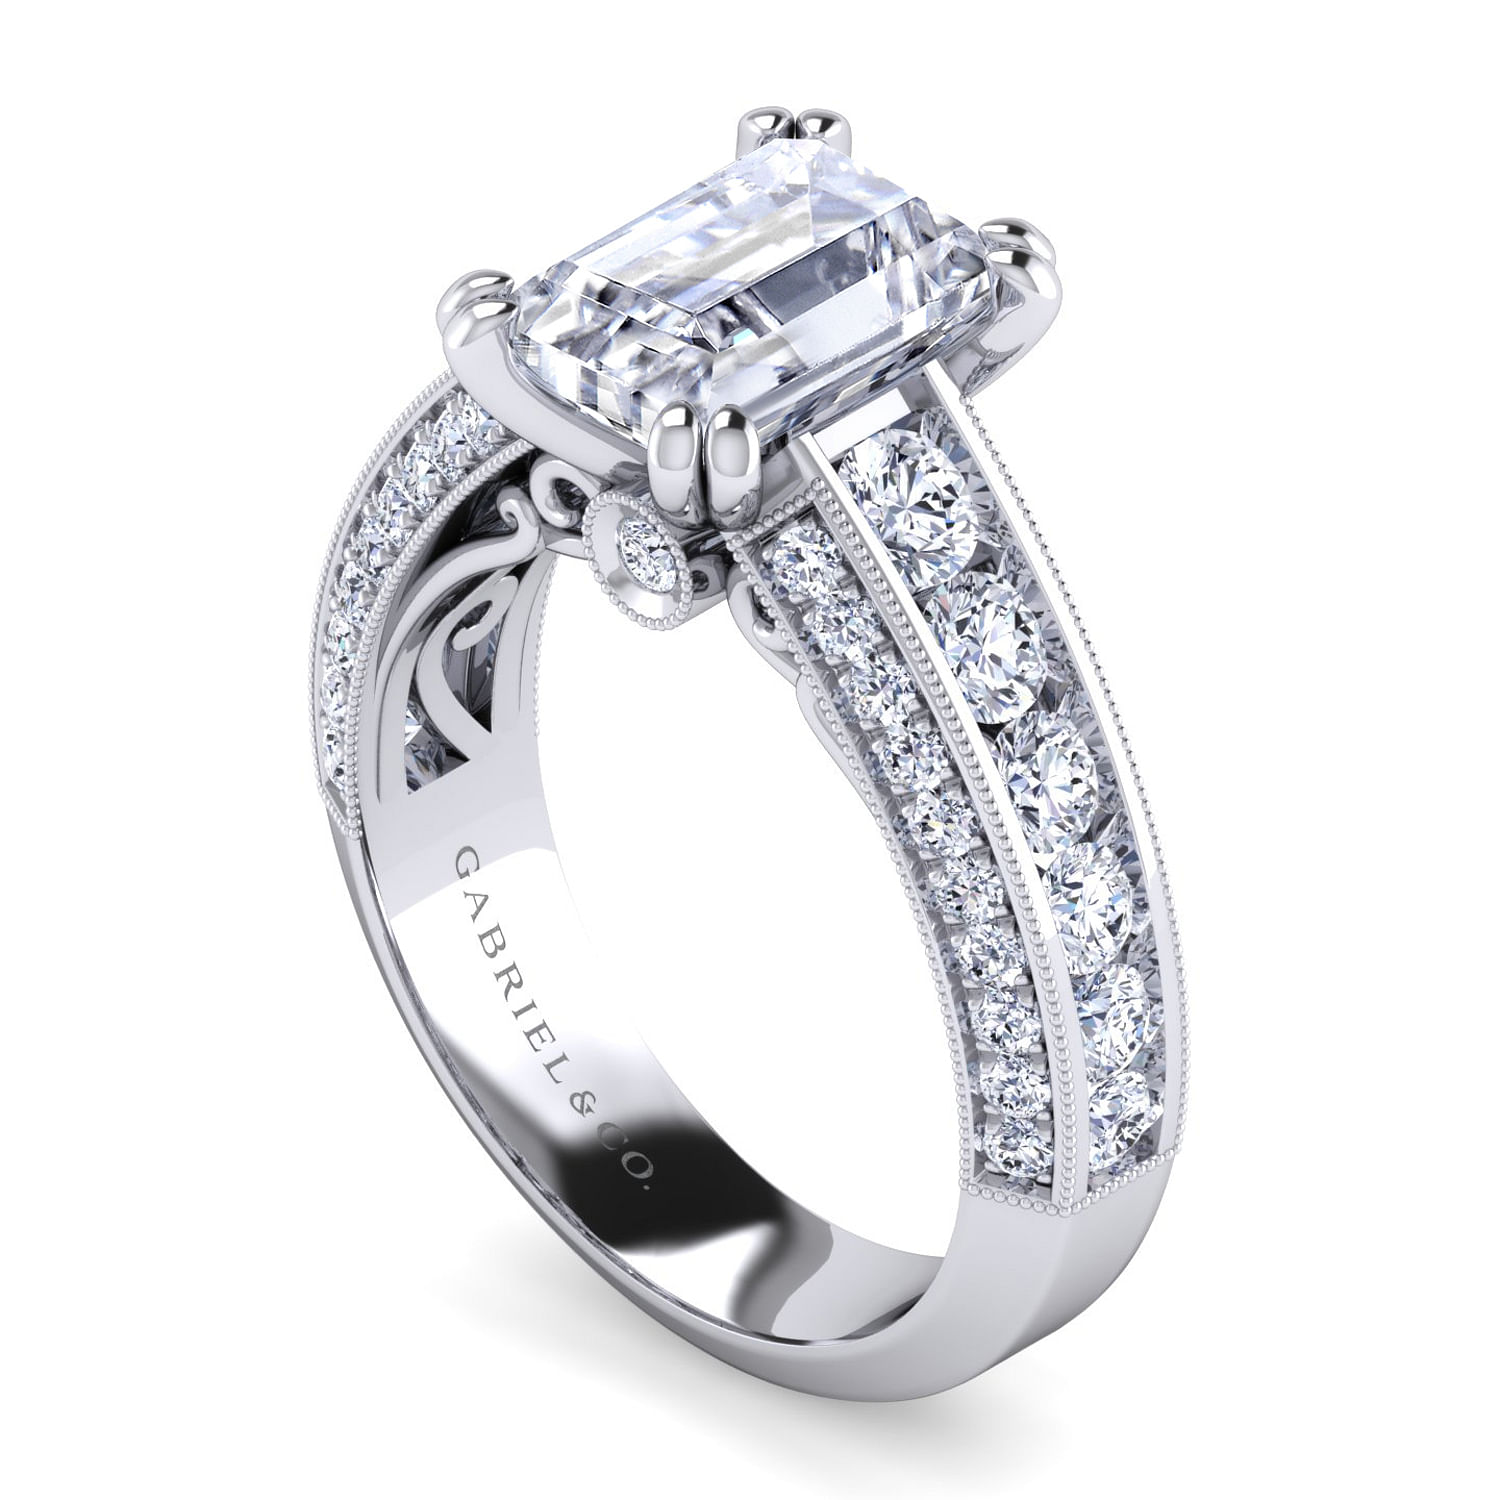 Rebecca - Vintage Inspired 14K White Gold Emerald Cut Wide Band Diamond Channel Set Engagement Ring - 1.28 ct - Shot 3